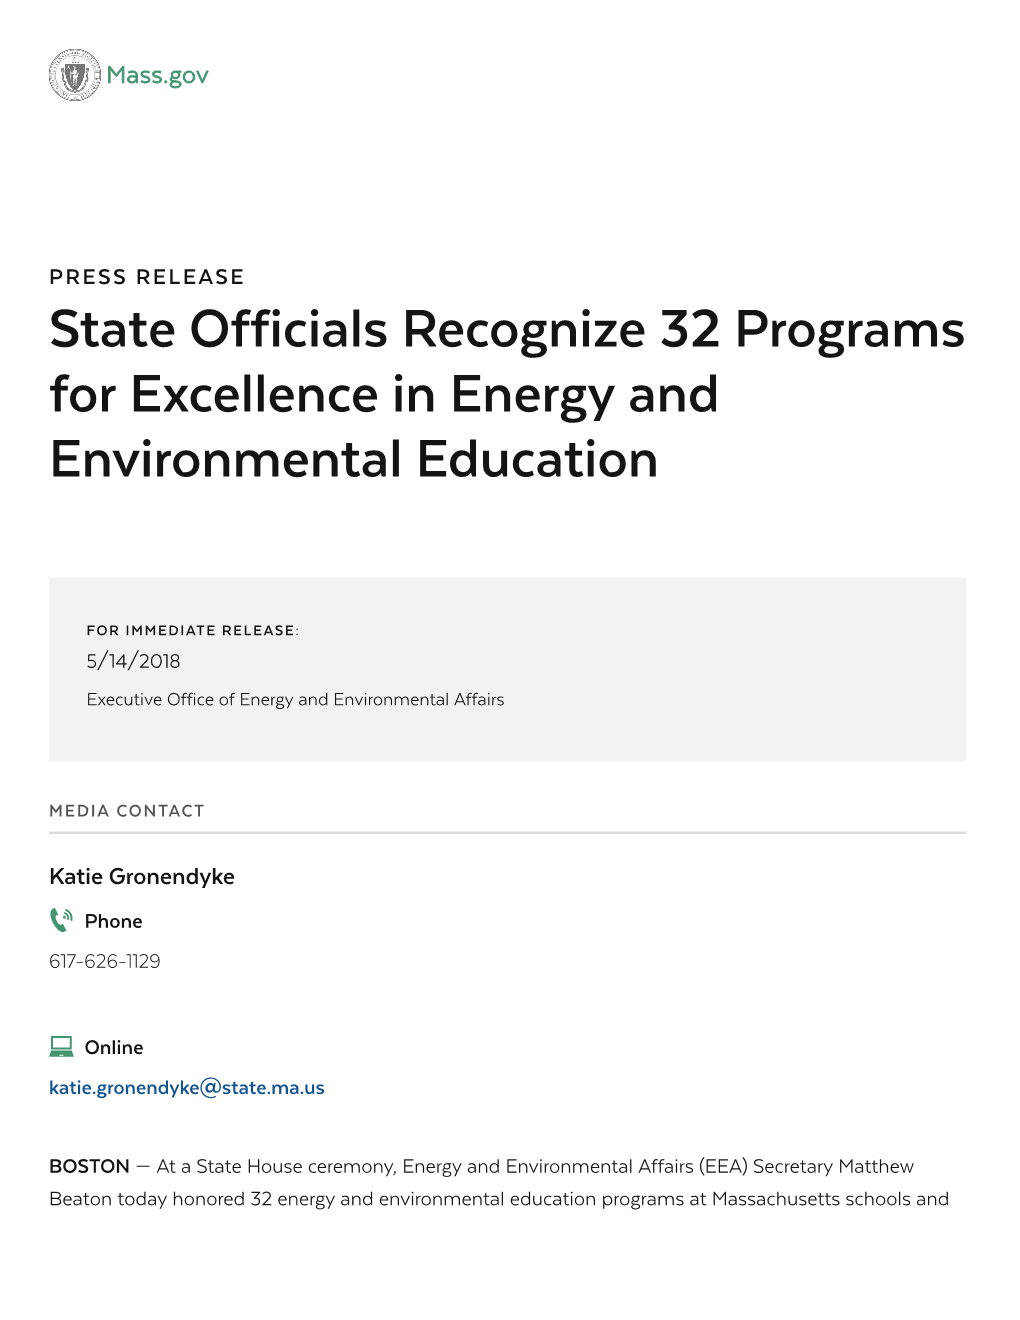 State Officials Recognize 32 Programs for Excellence in Energy and Environmental Education